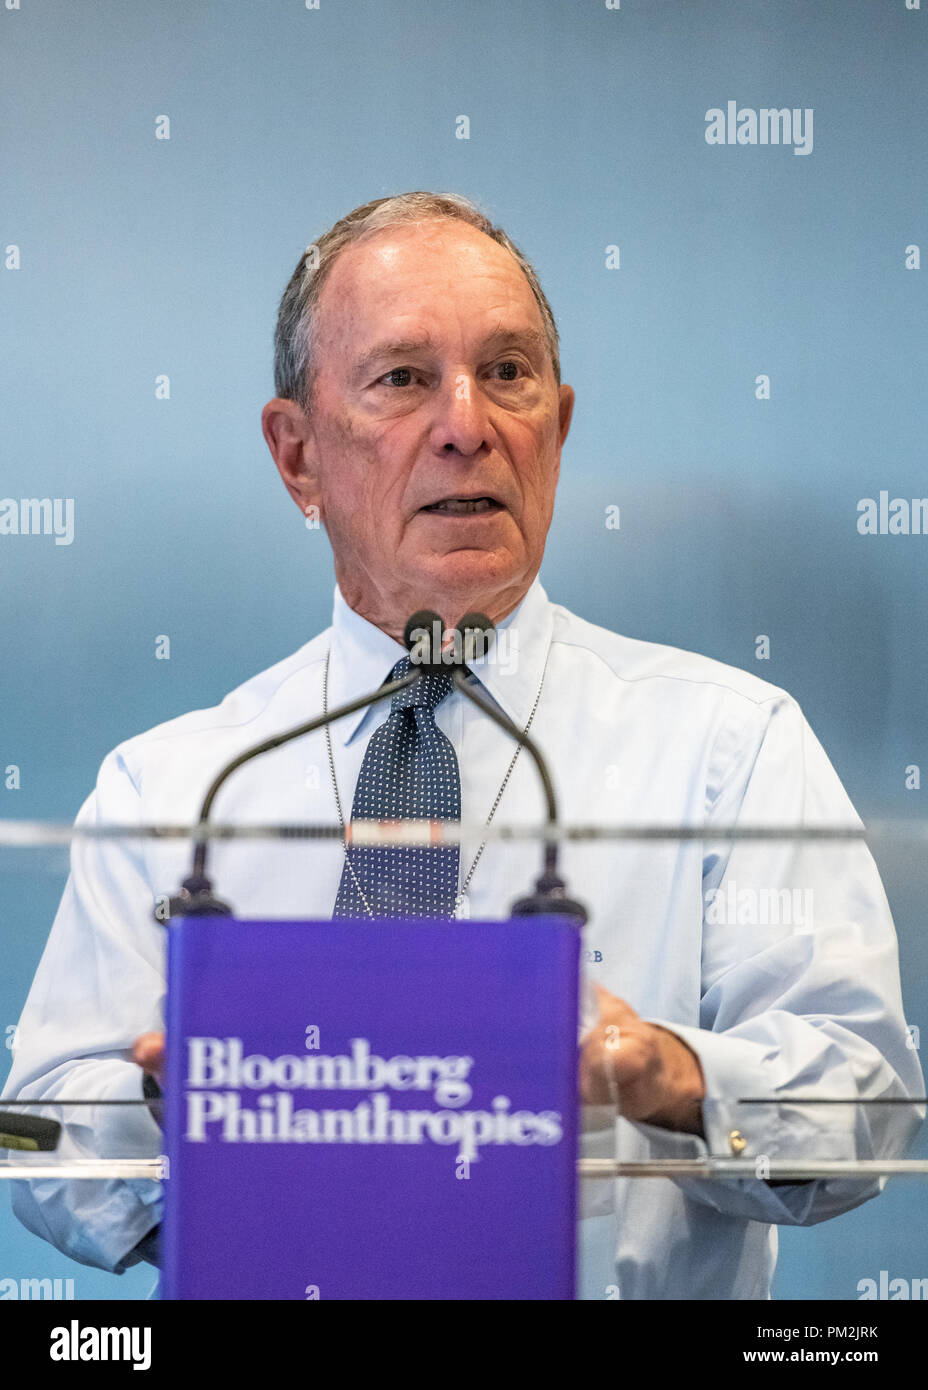 New York, USA, 17 September 2018.  Former New York city Mayor Michael Bloomberg addresses a press briefing about the Bloomberg Global Business Forum 2018. Fifty heads of state from six continents are expected to attend the annual event, focused on strengthening global trade and economic alliances, which will be held on Sept. 26 alongside 73rd U.N. General Assembly.  Photo by Enrique Shore Credit: Enrique Shore/Alamy Live News Stock Photo